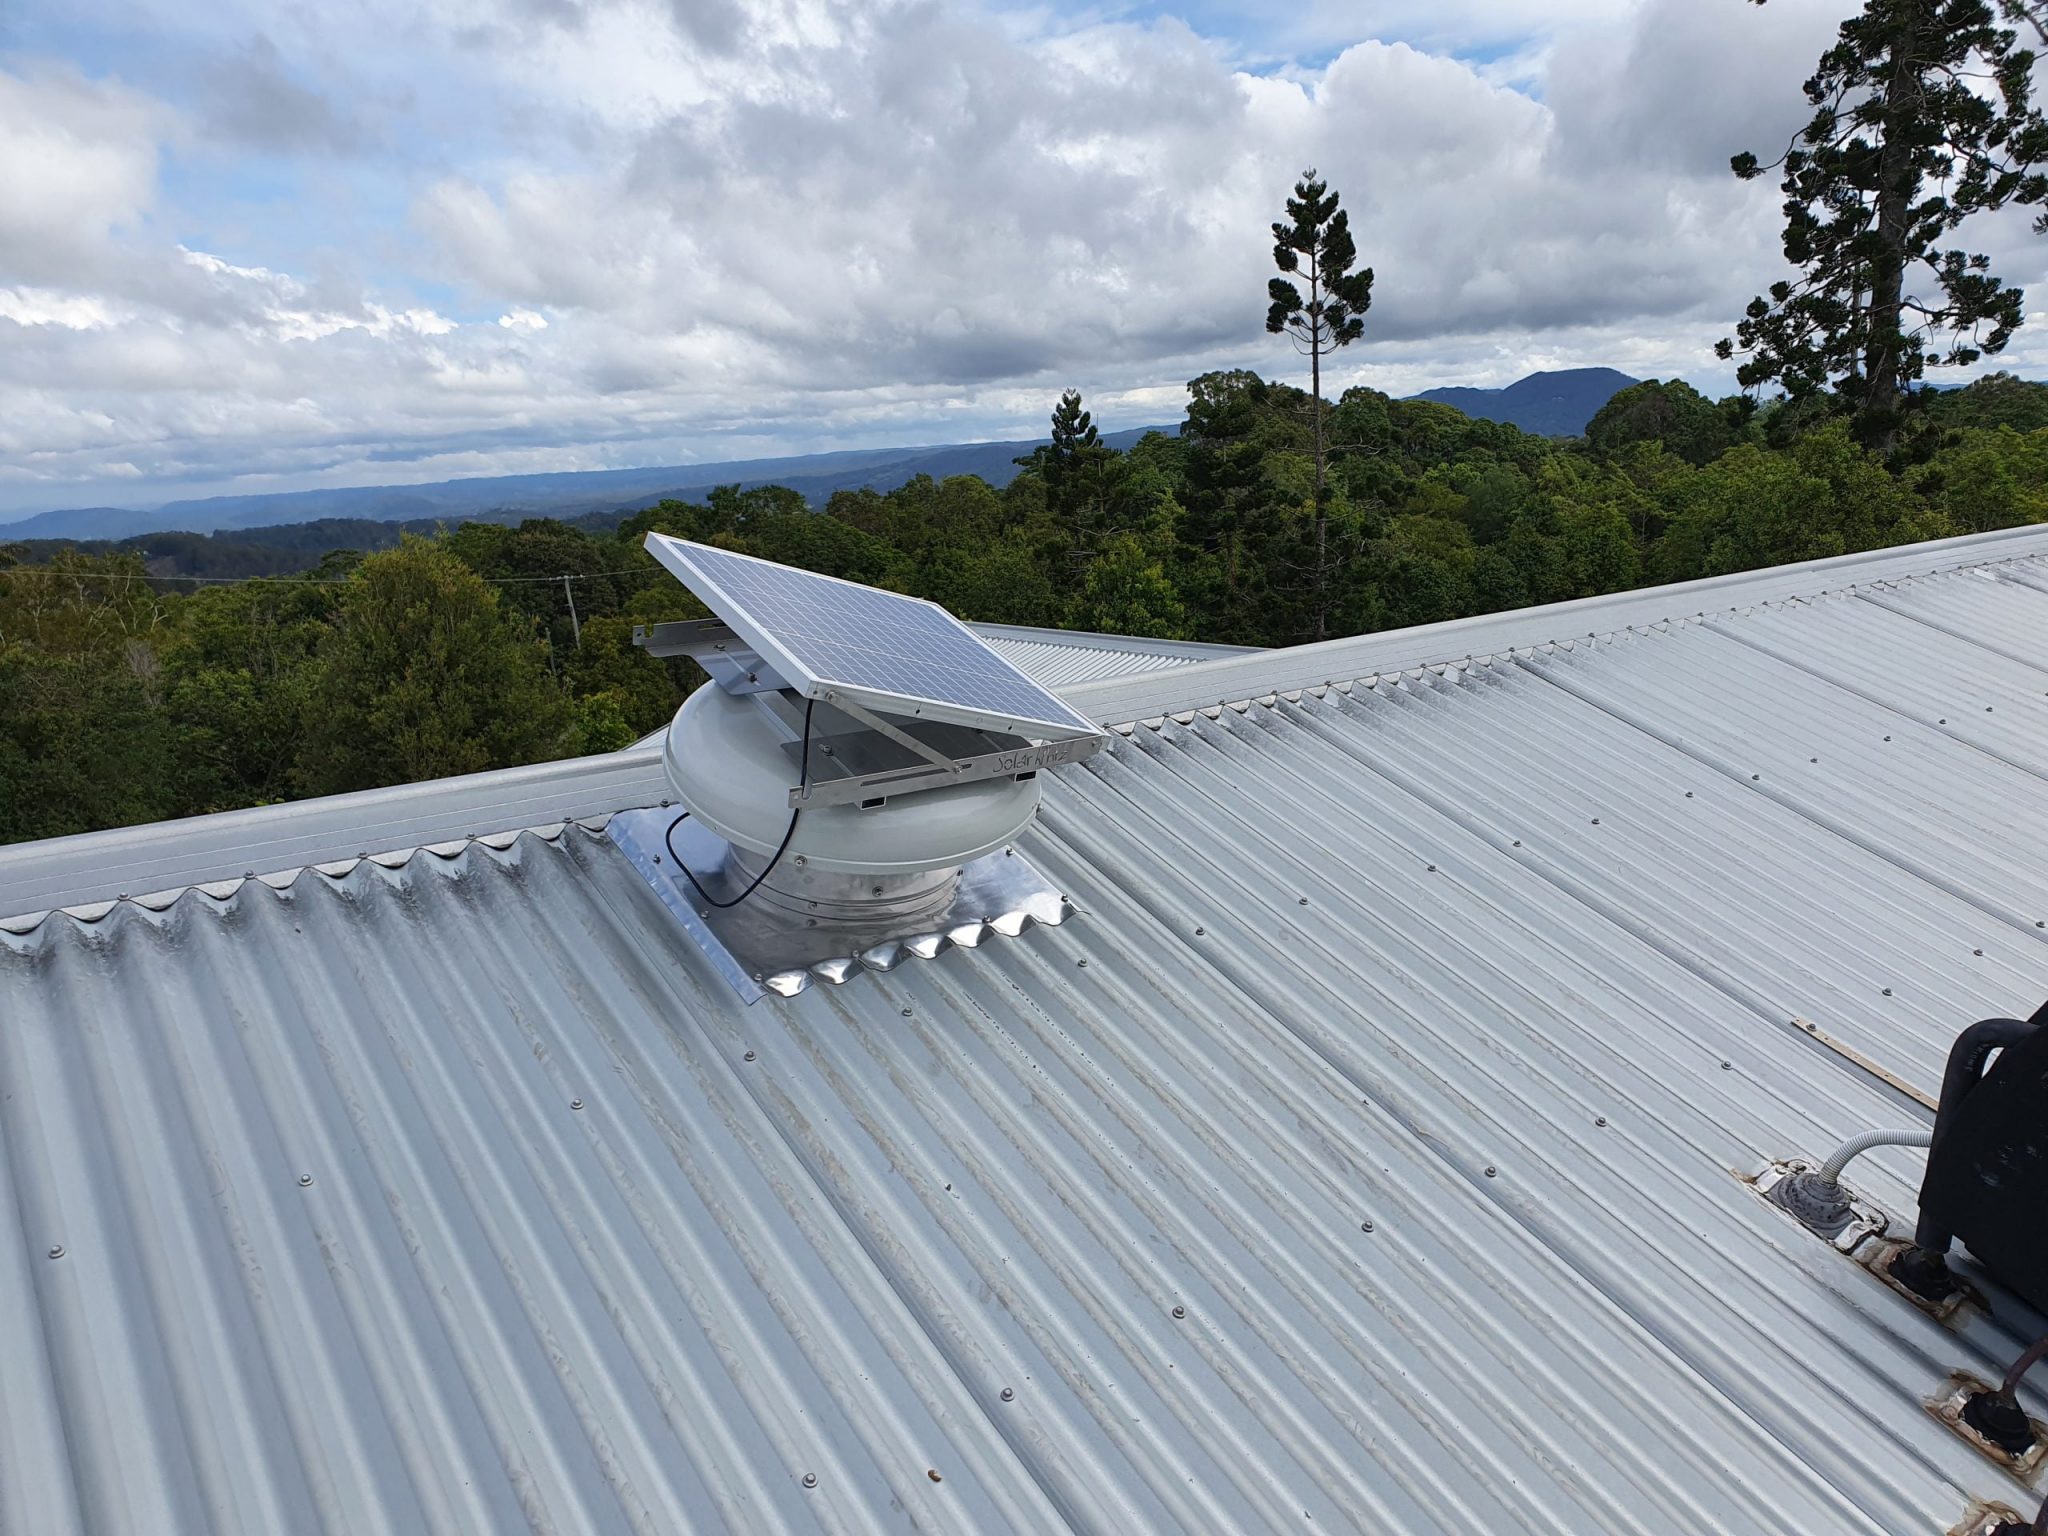 Install on a tin roof